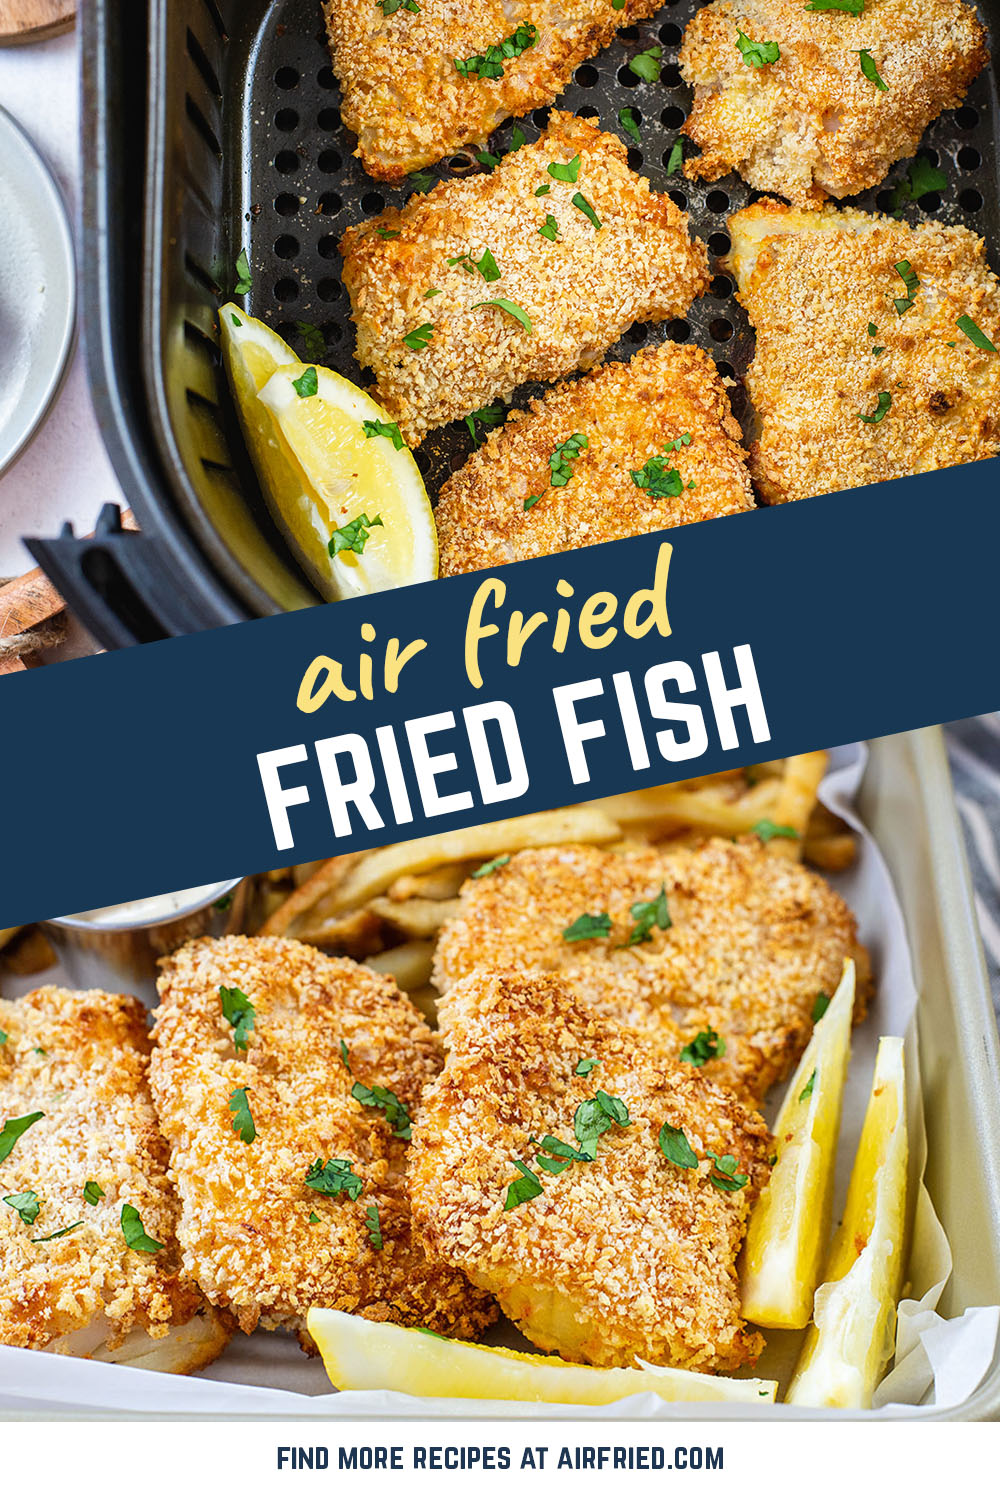 The air fryer works very well for cooking fish to a nice light and fluffy texture.  The breading is crisp and lightly seasoned, which is perfect for cod!